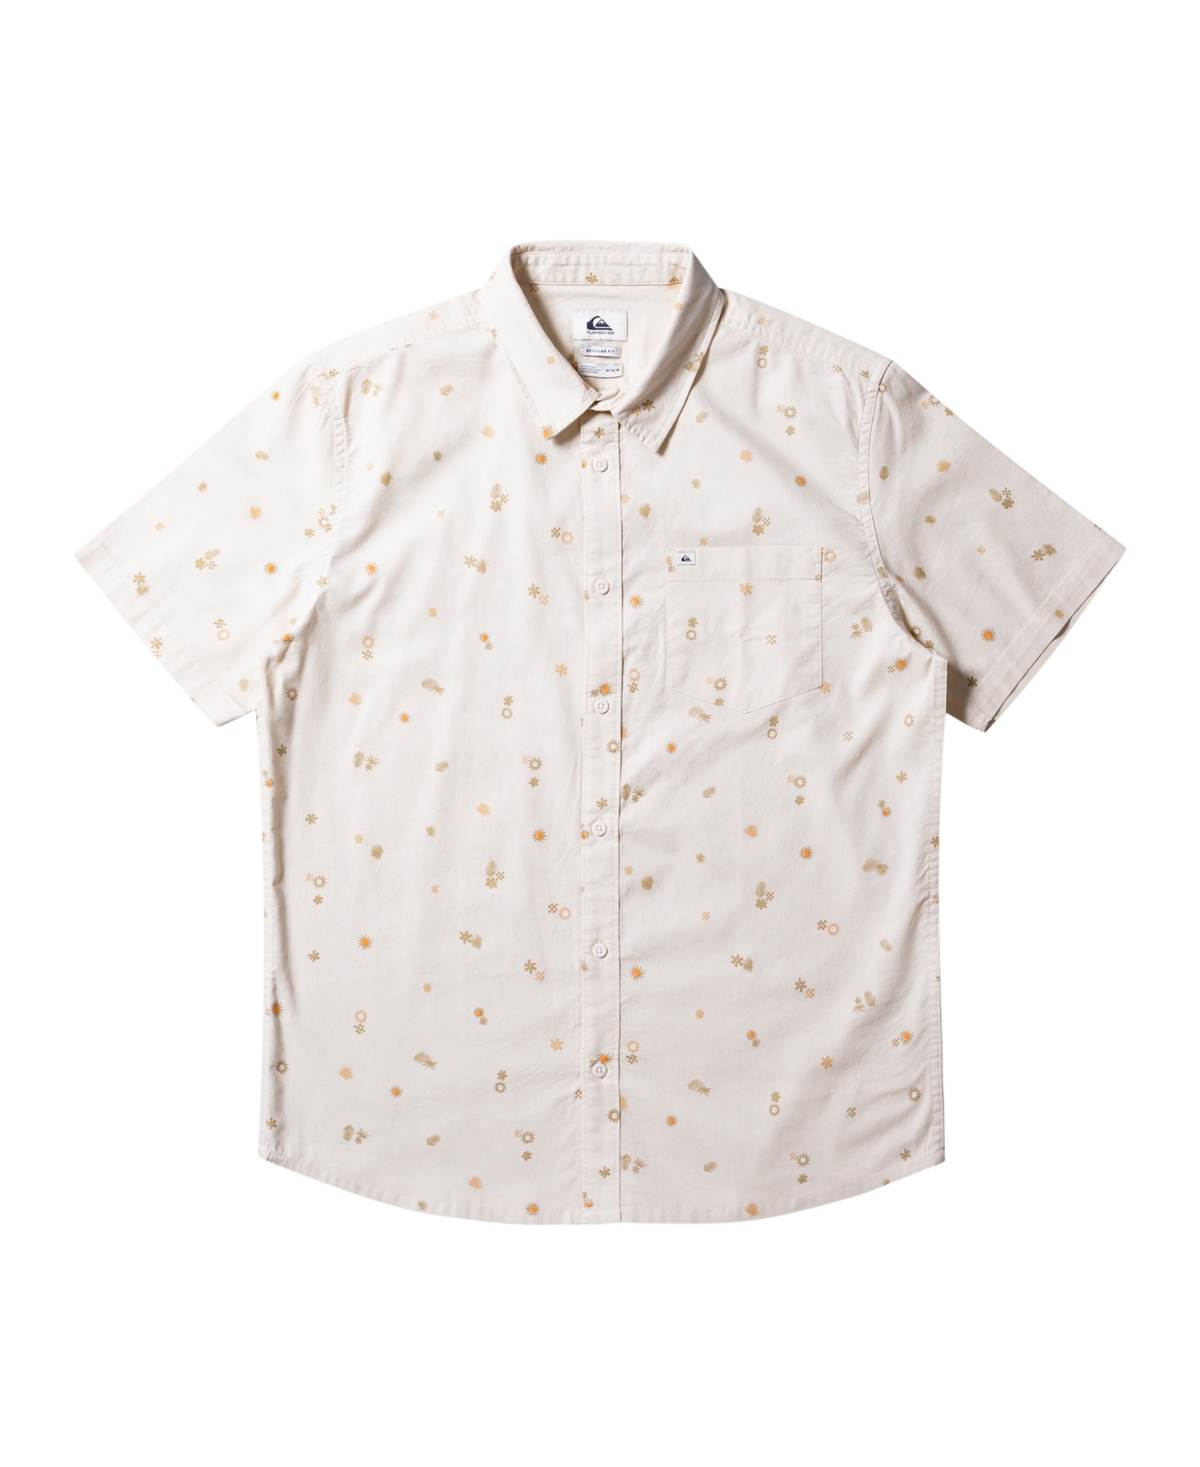 Quiksilver Men's Short Sleeves Peaceful Rave Shirt In Birch Peaceful Rave